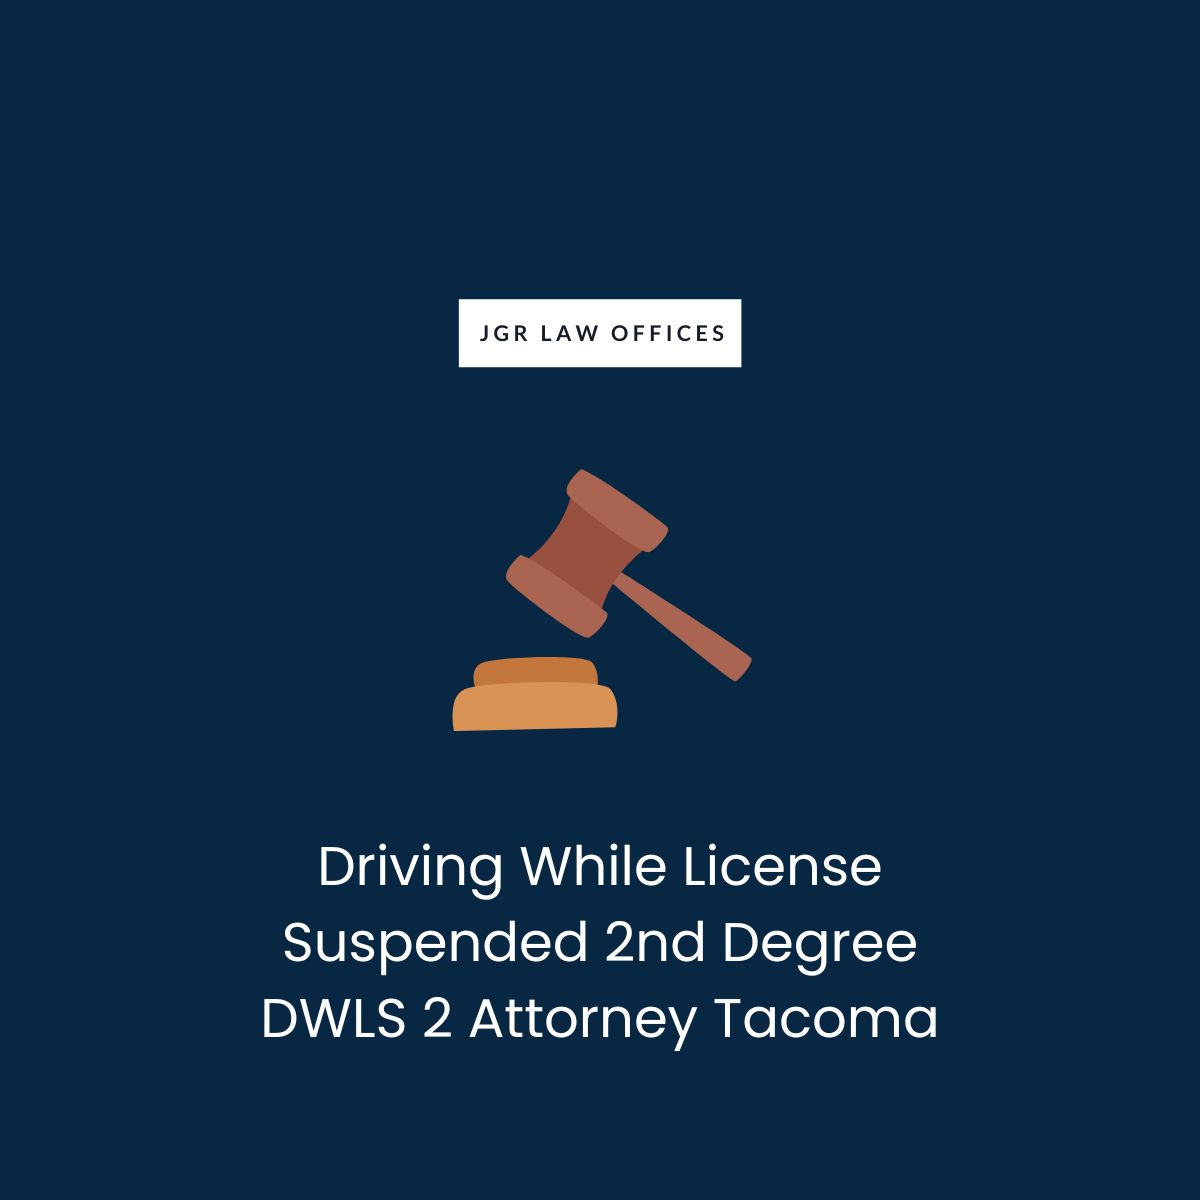 Driving While License Suspended 2nd Degree DWLS 2 Attorney Tacoma